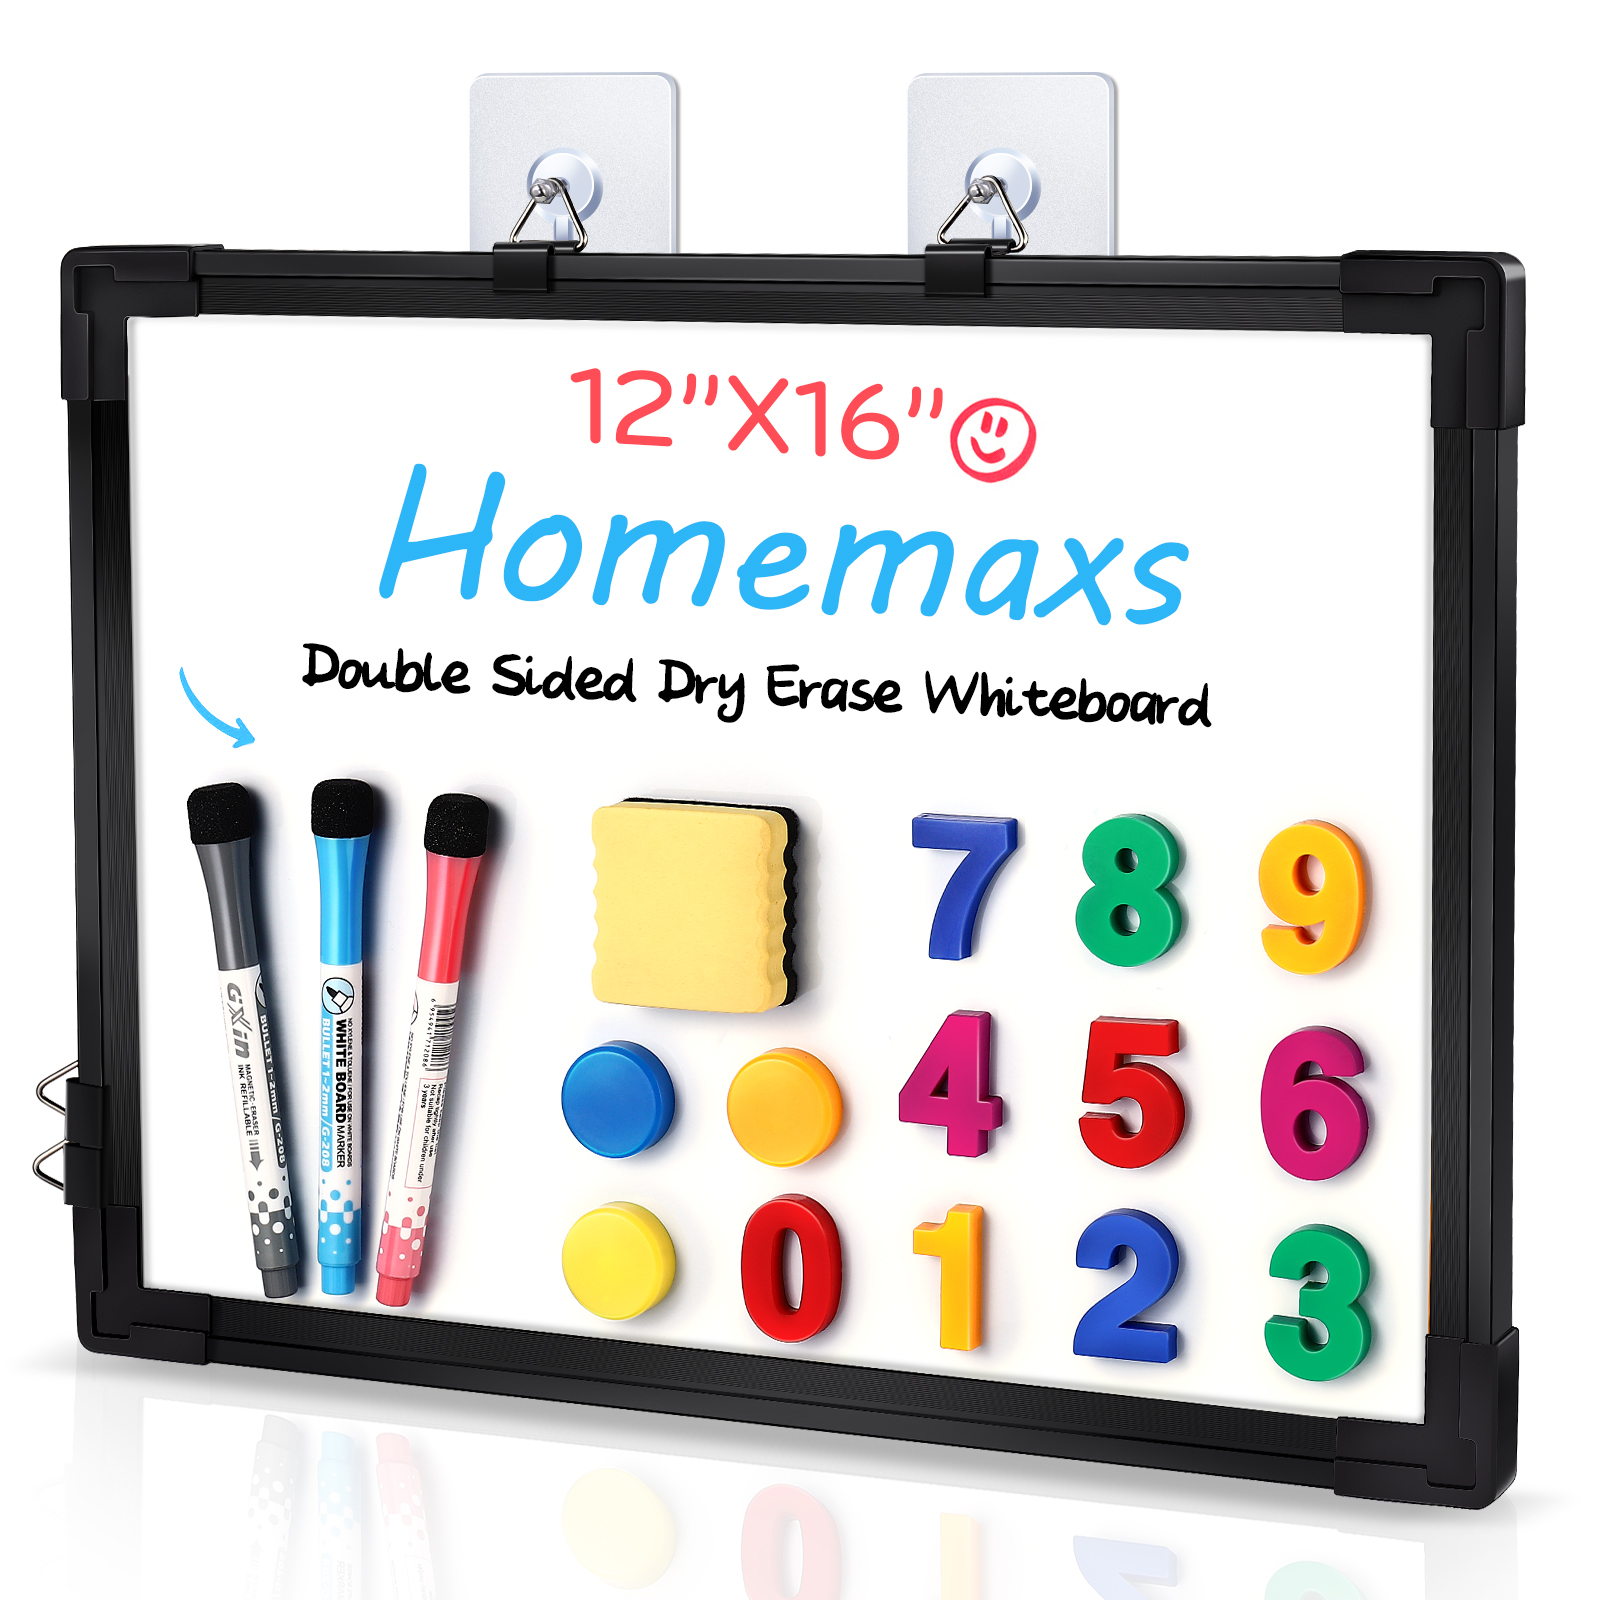 Homemaxs 12 x 16 in Hanging Dry Erase Board Double Sided White Board Wall  Mount Message Board Reminder for School Home Office (B 